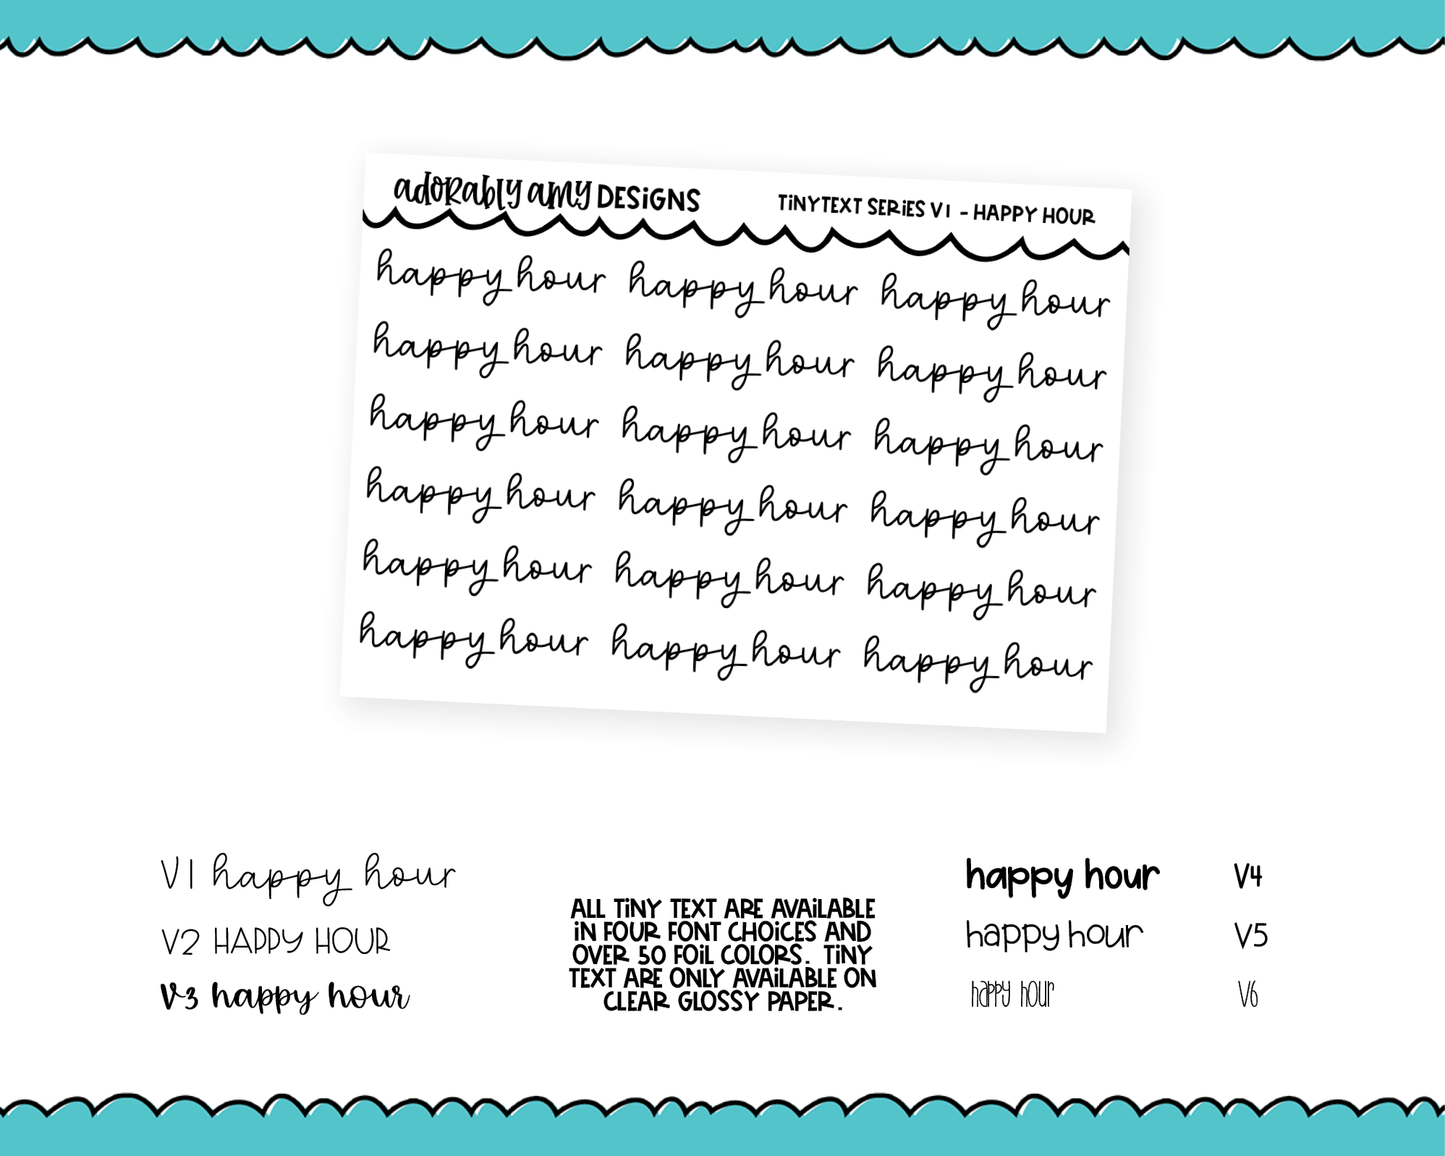 Foiled Tiny Text Series - Happy Hour Checklist Size Planner Stickers for any Planner or Insert